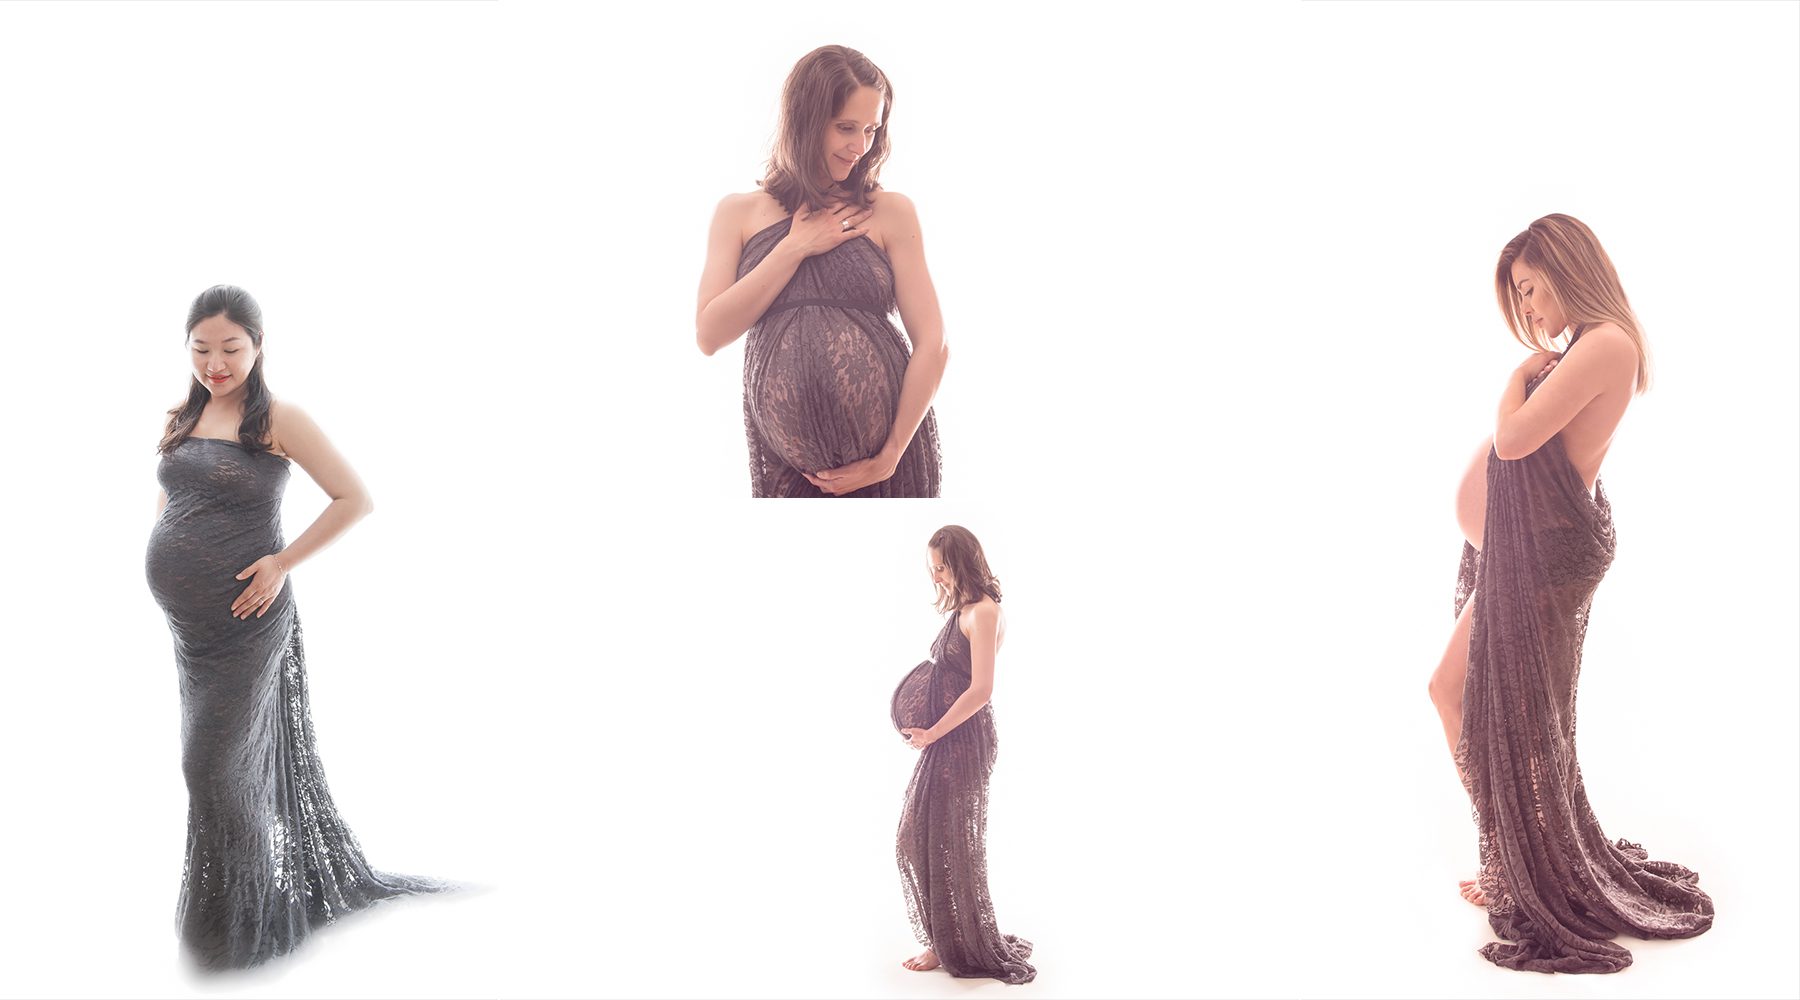 Lacey Wrap Grey - maternity gowns from Rachel Yoon Photography